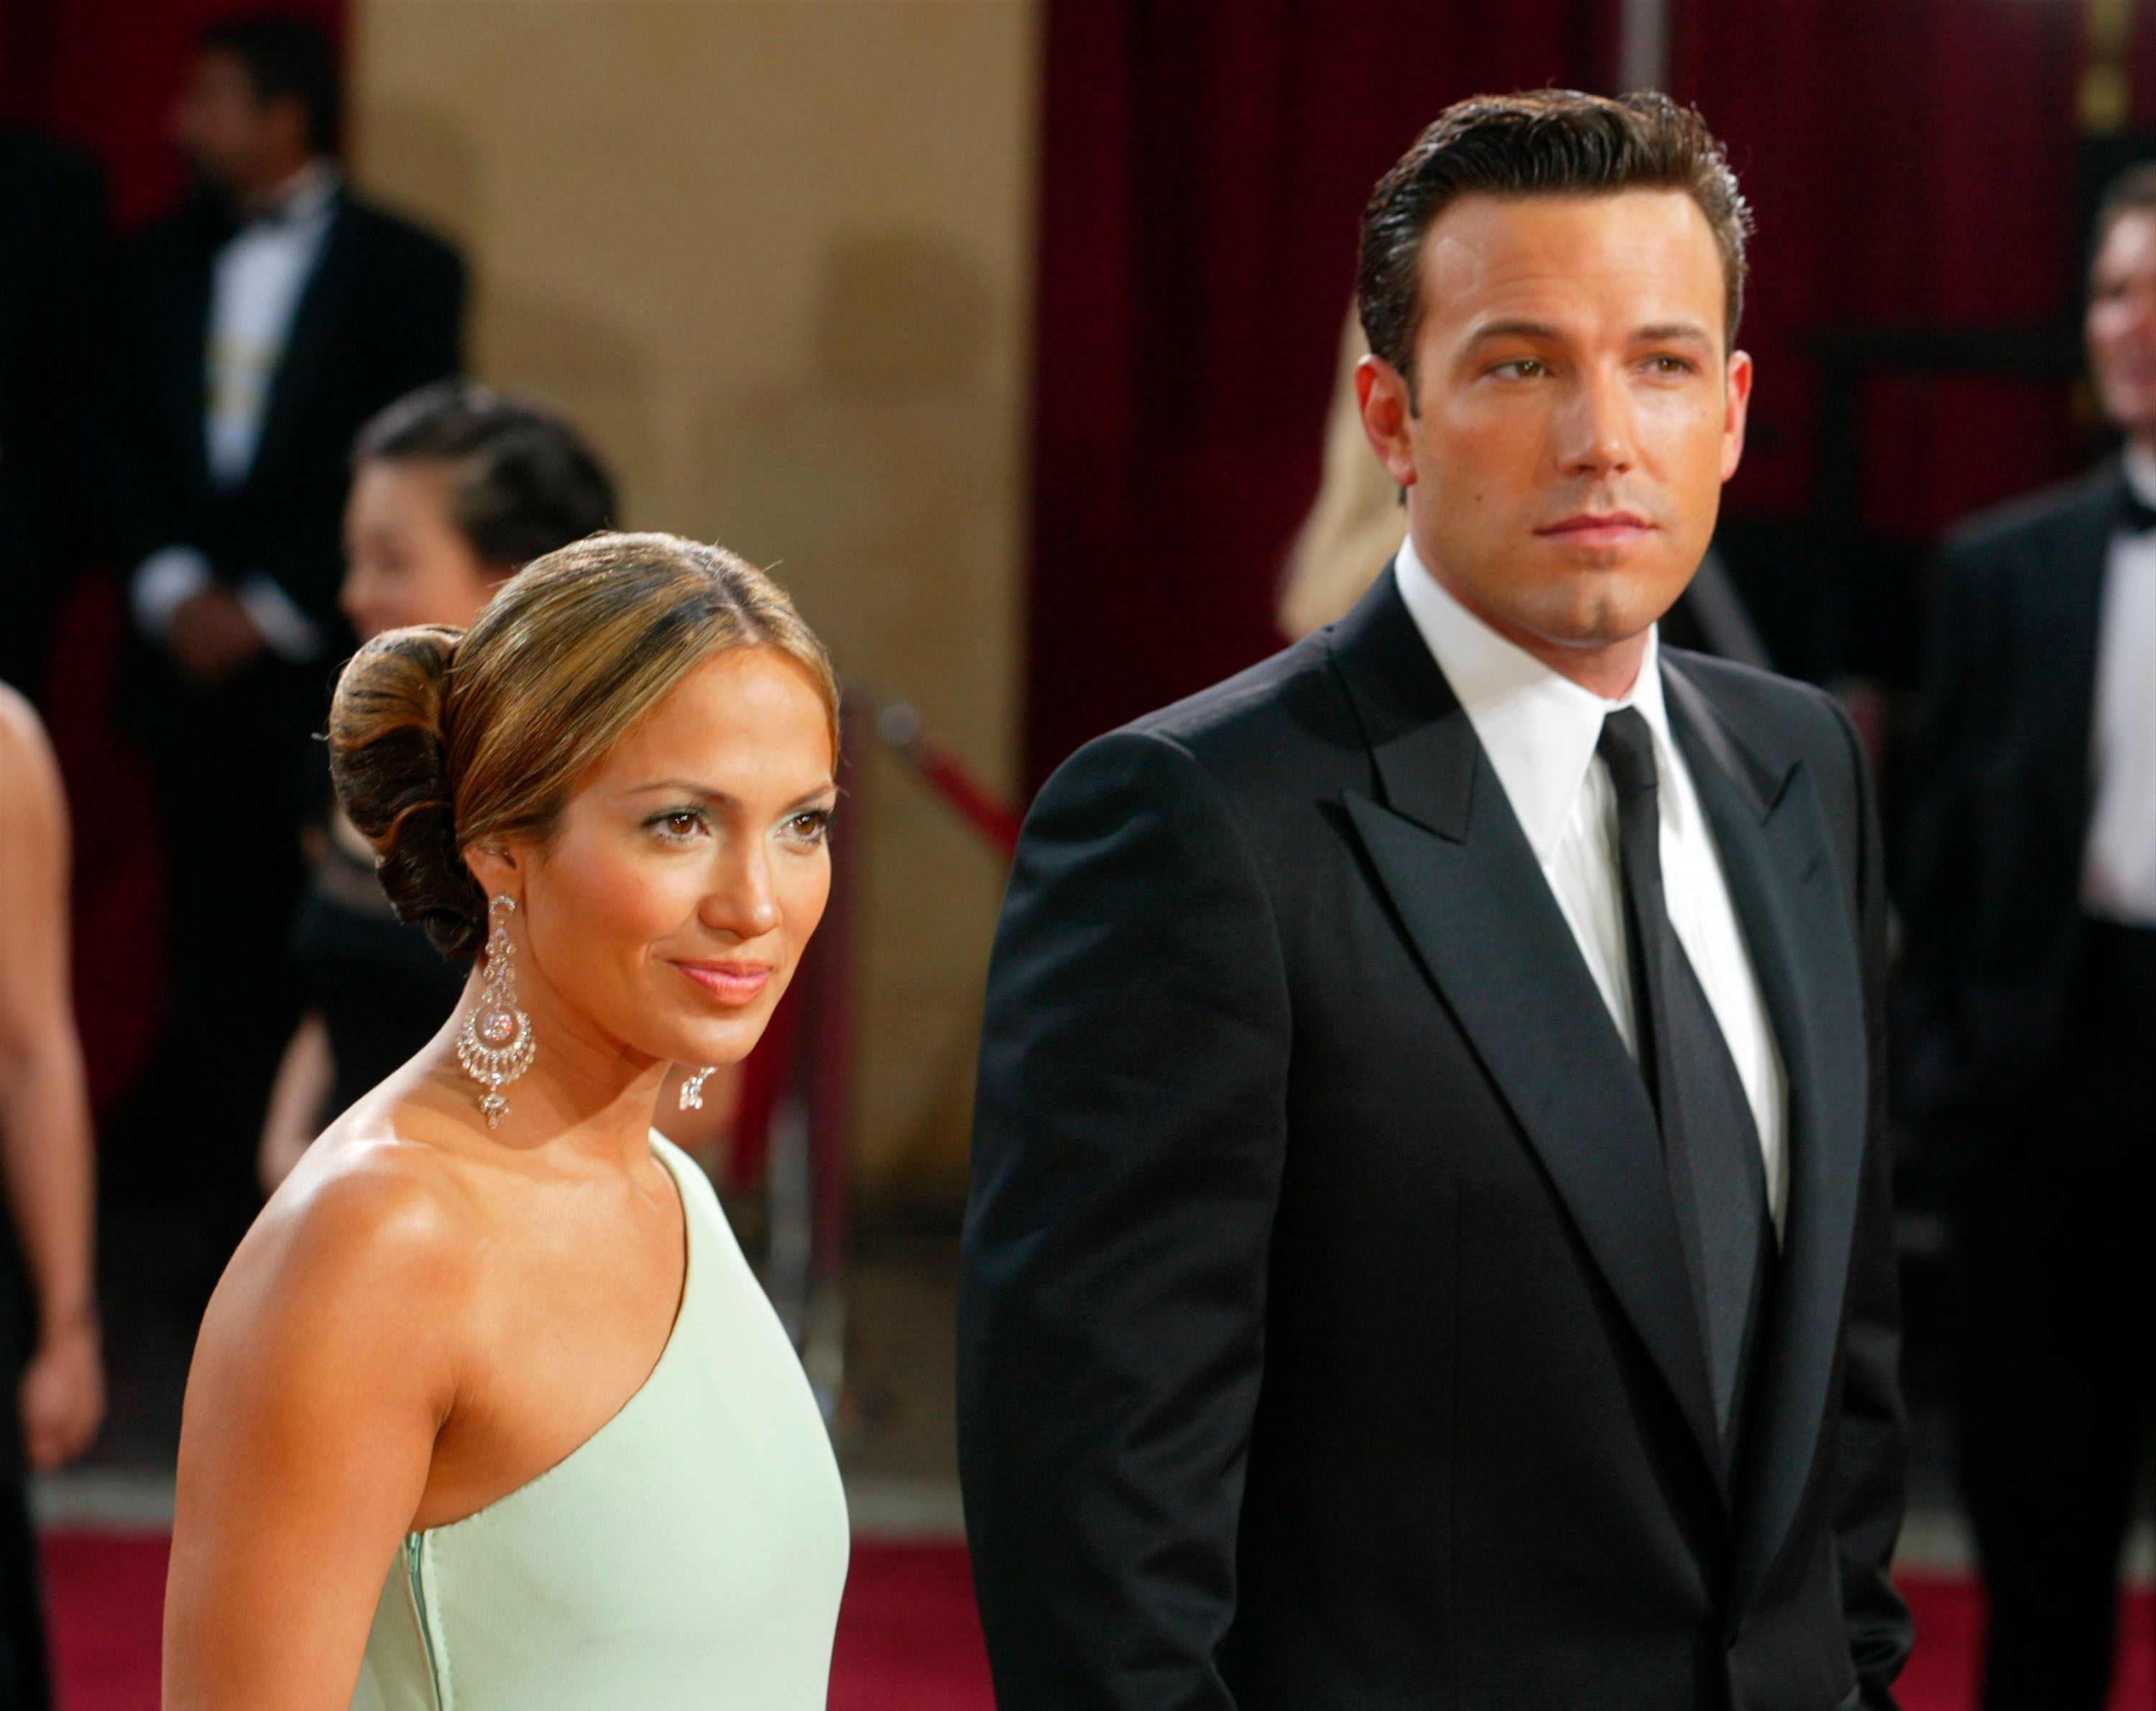 Jennifer Lopez and Ben Affleck at the 75th Annual Academy Awards at the Kodak Theater on March 23, 2003, in Hollywood, California. | Photo: Getty Images